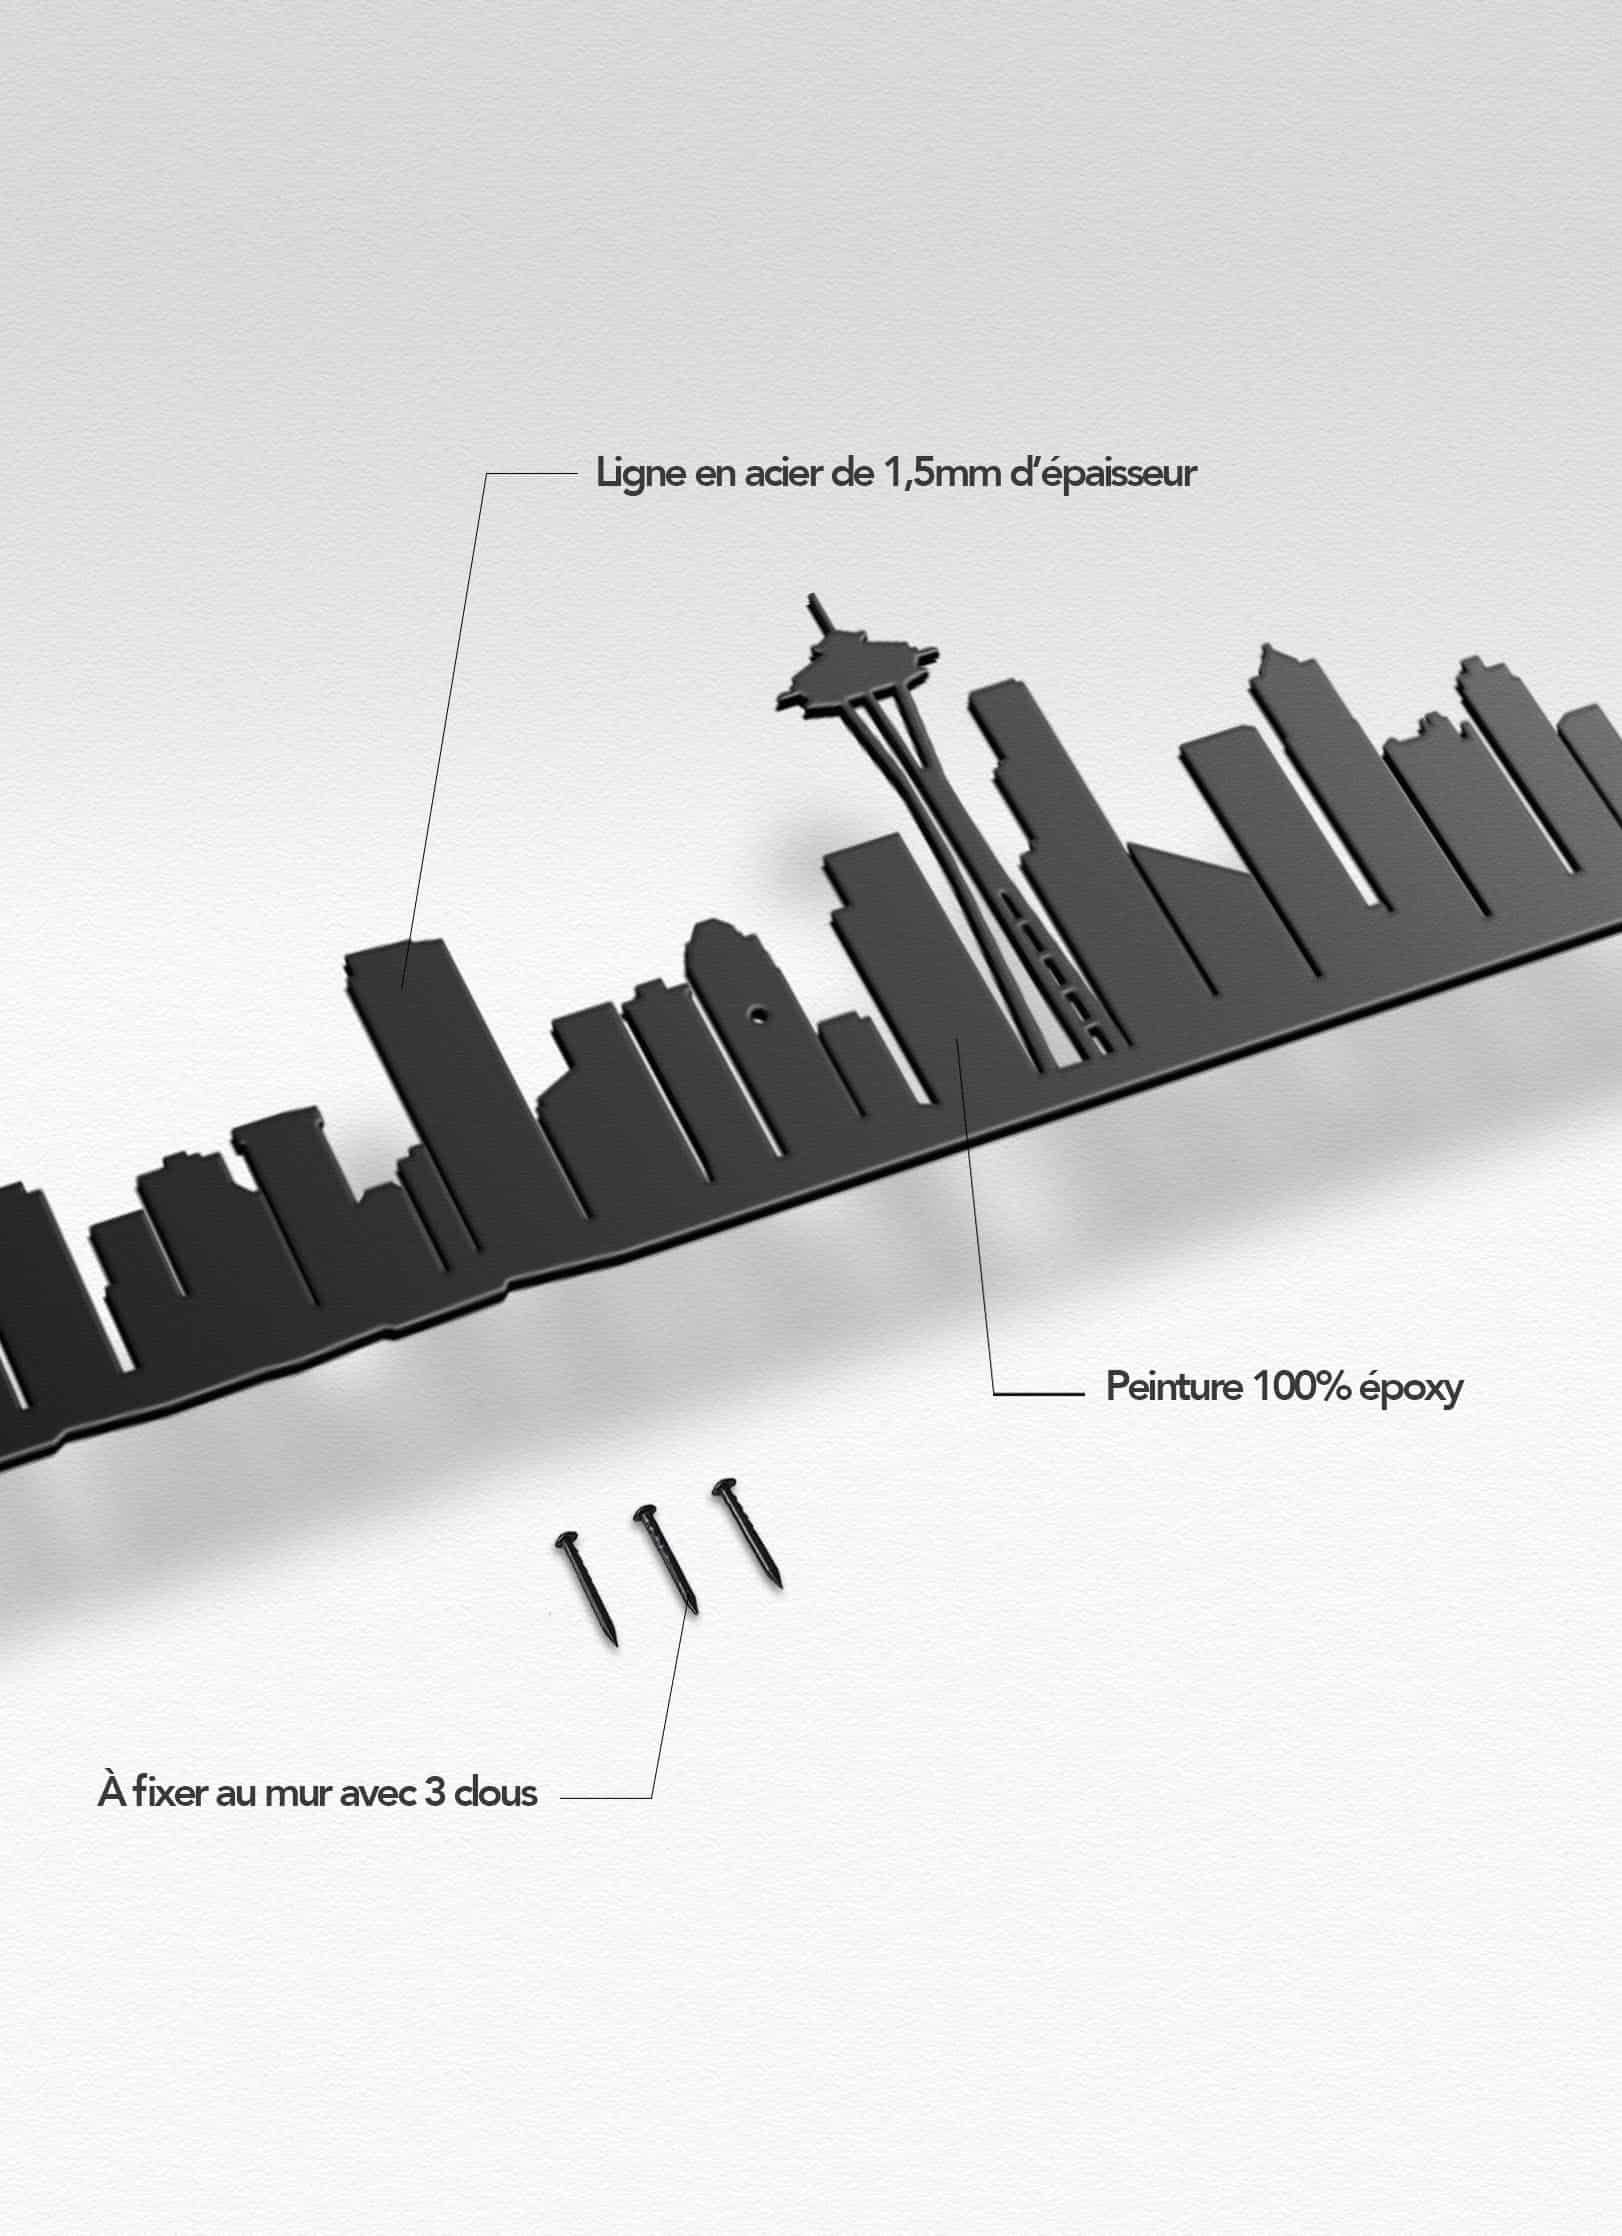 Presentation of the skyline of Seattle